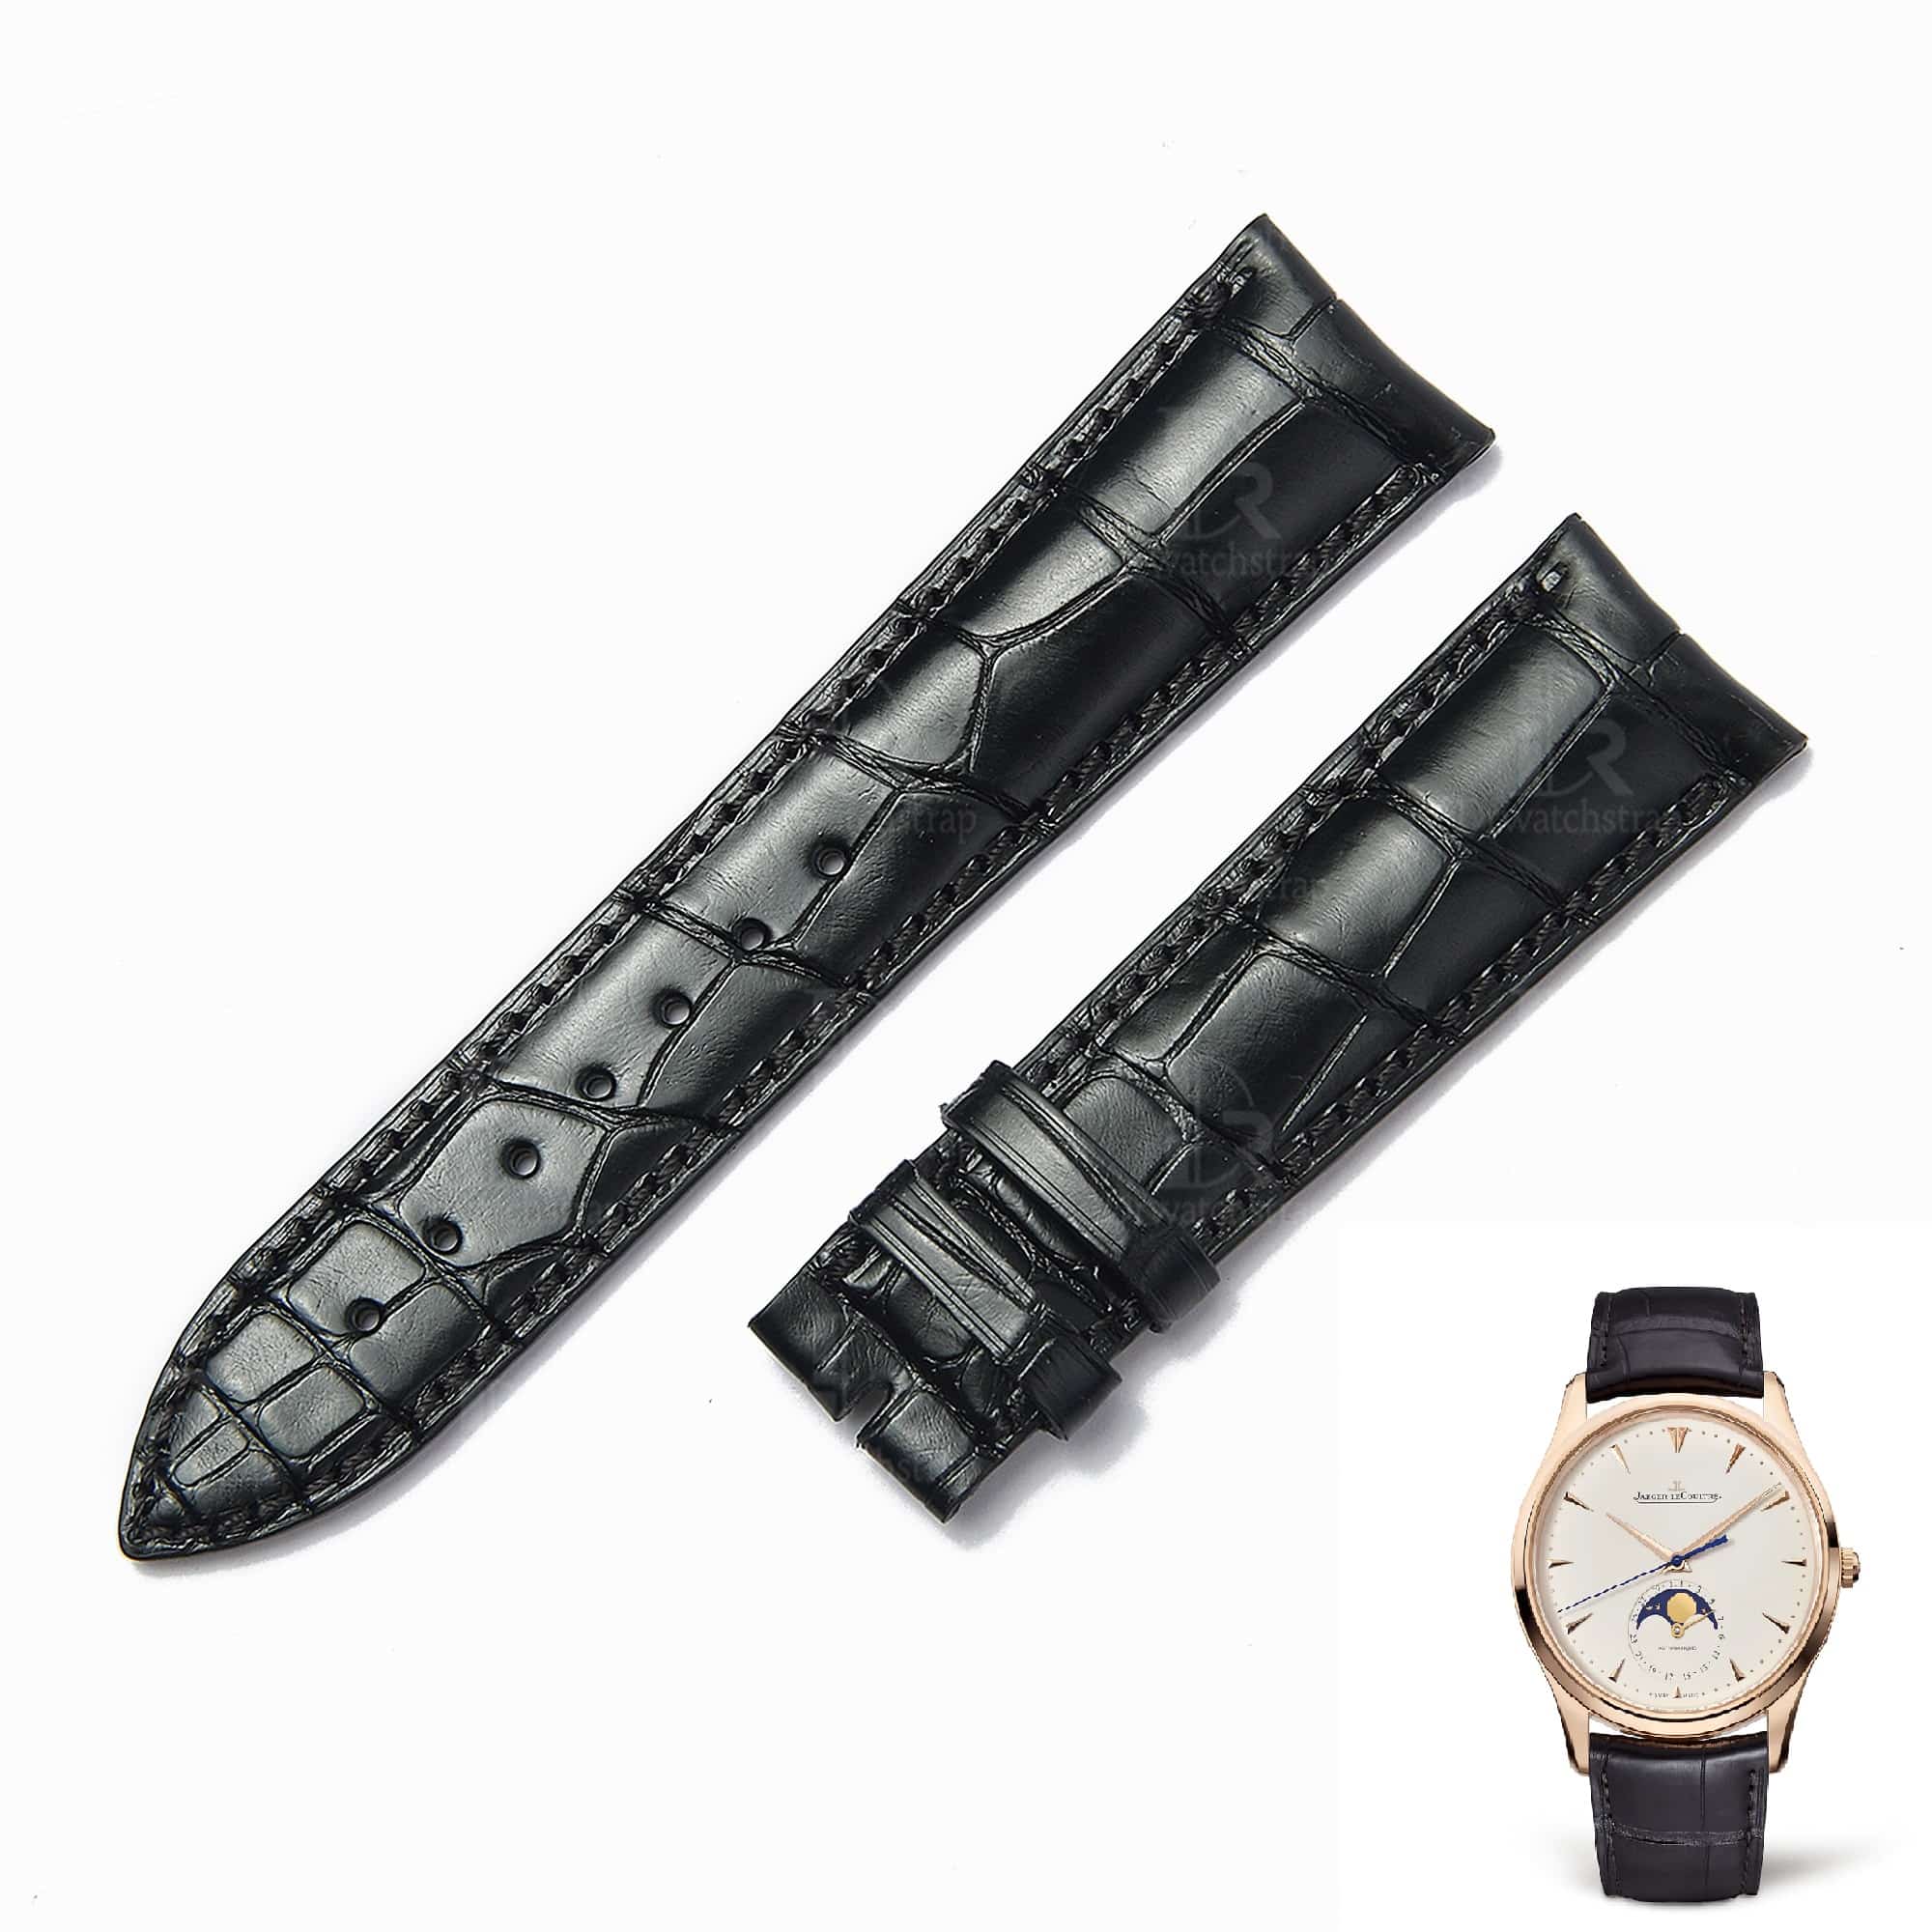 Custom alligator leather jaeger lecoultre watch bands for JLC Master watches - OEM Curved end leather watch band for sale